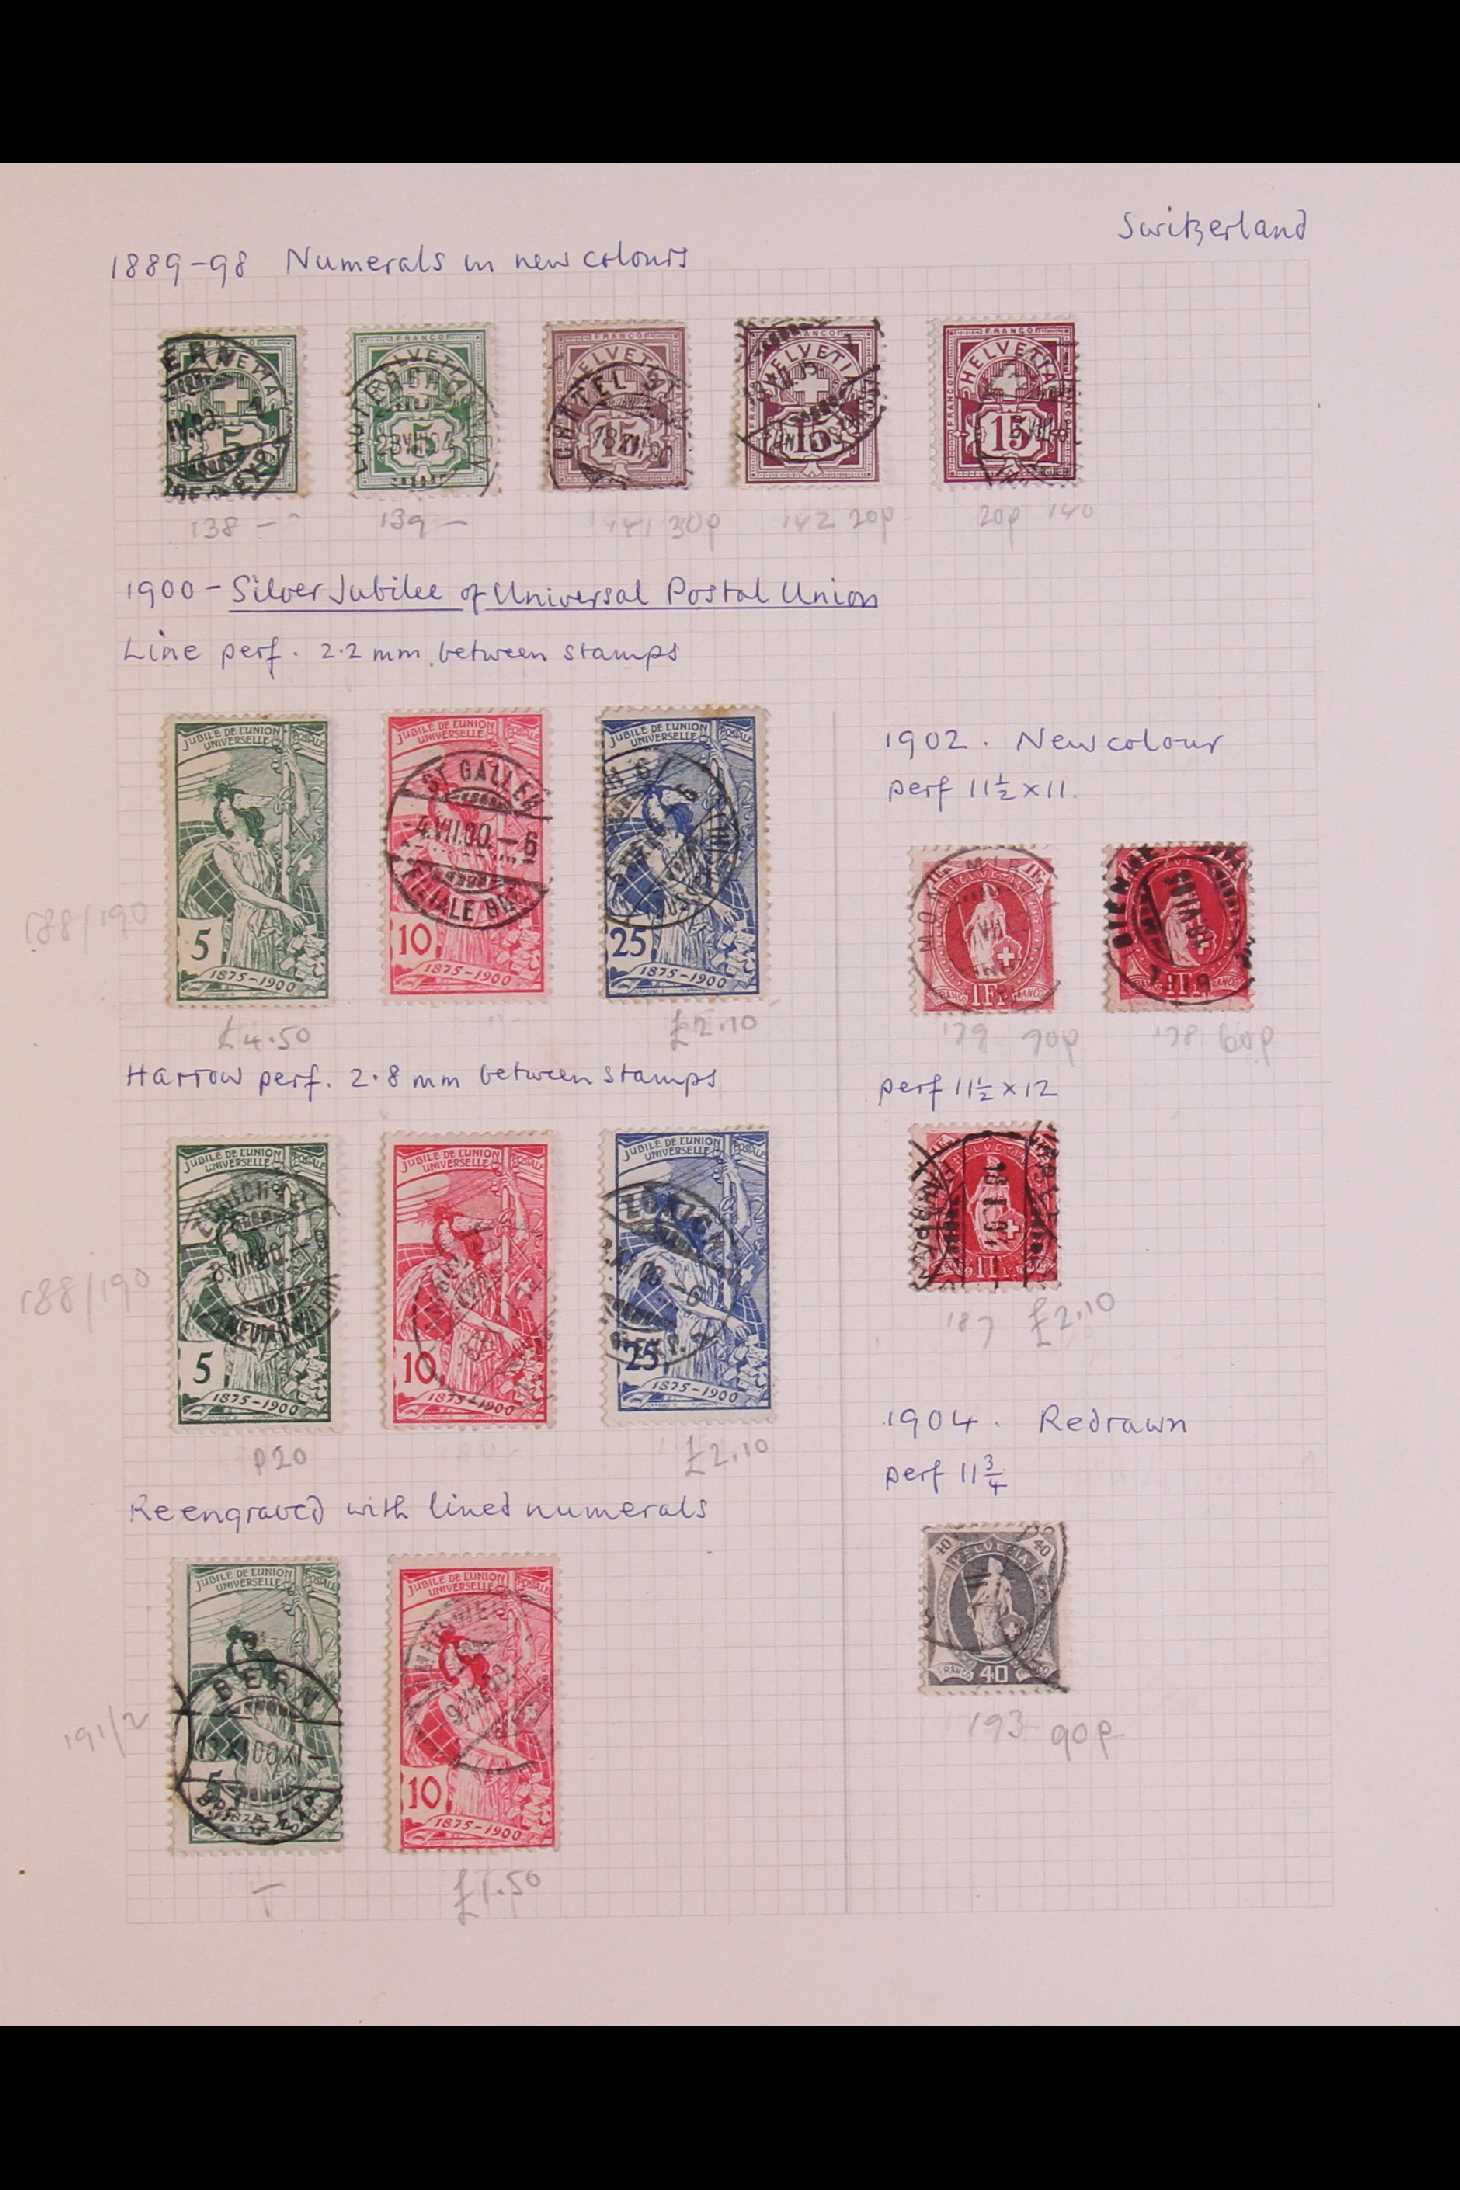 SWITZERLAND 1850 - 1959 COLLECTION of chiefly used stamps on leaves, incl 1850 5r & 10r, 1851 5r, - Image 6 of 17